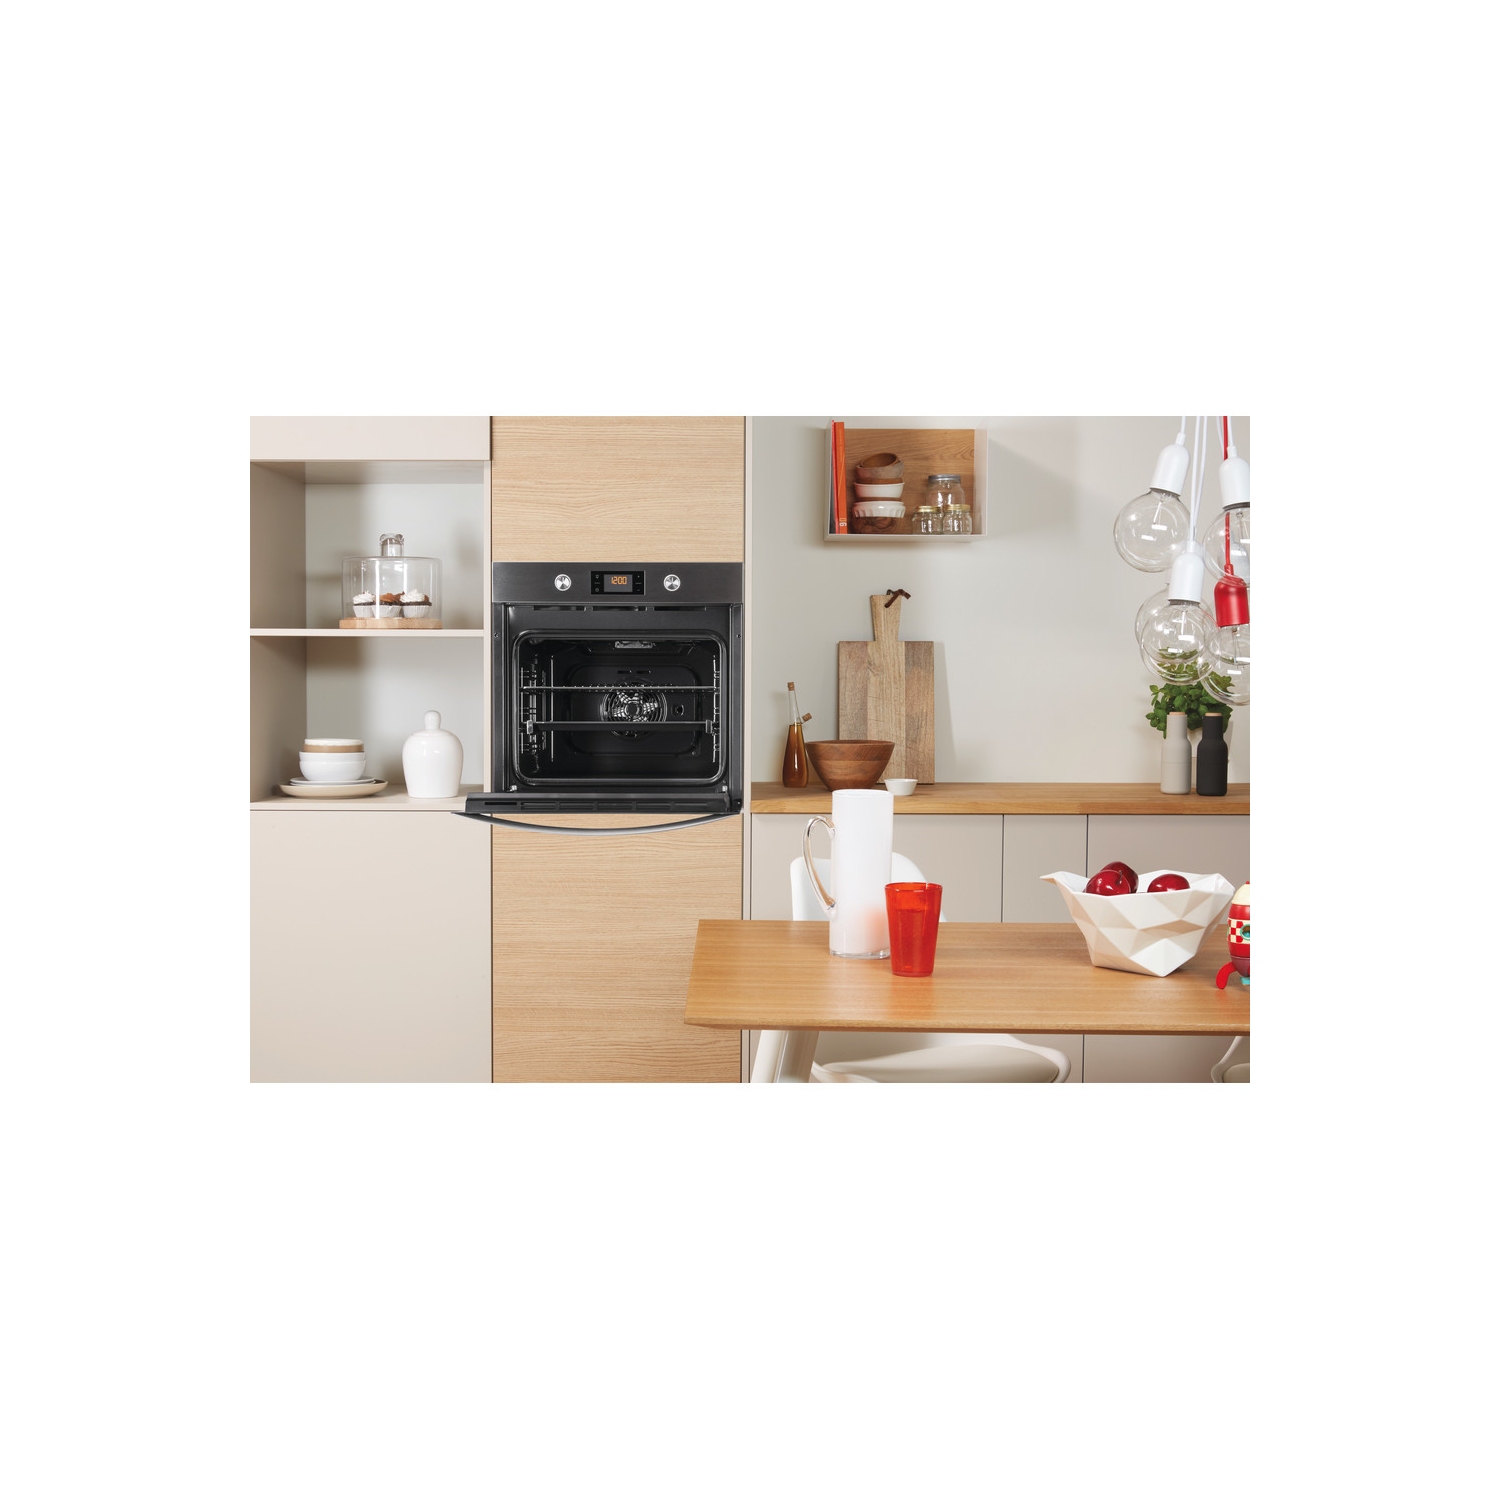 Indesit Built In Electric Single Oven - Stainless Steel - A+ Rated - 3